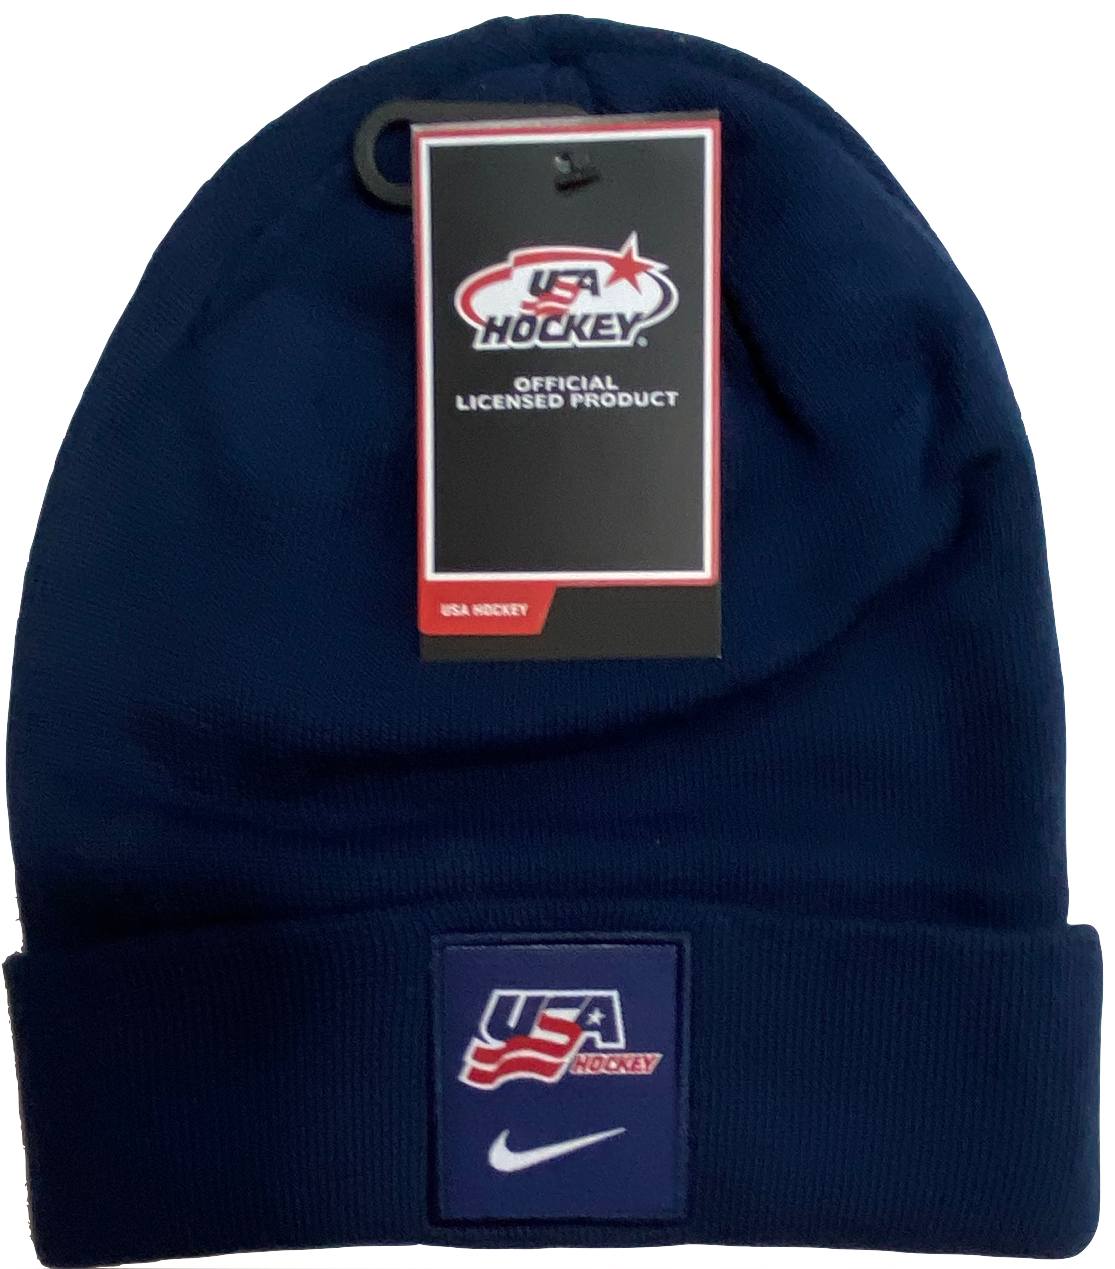 Men’s USA Hockey Patched Navy Cuffed Knit By Nike